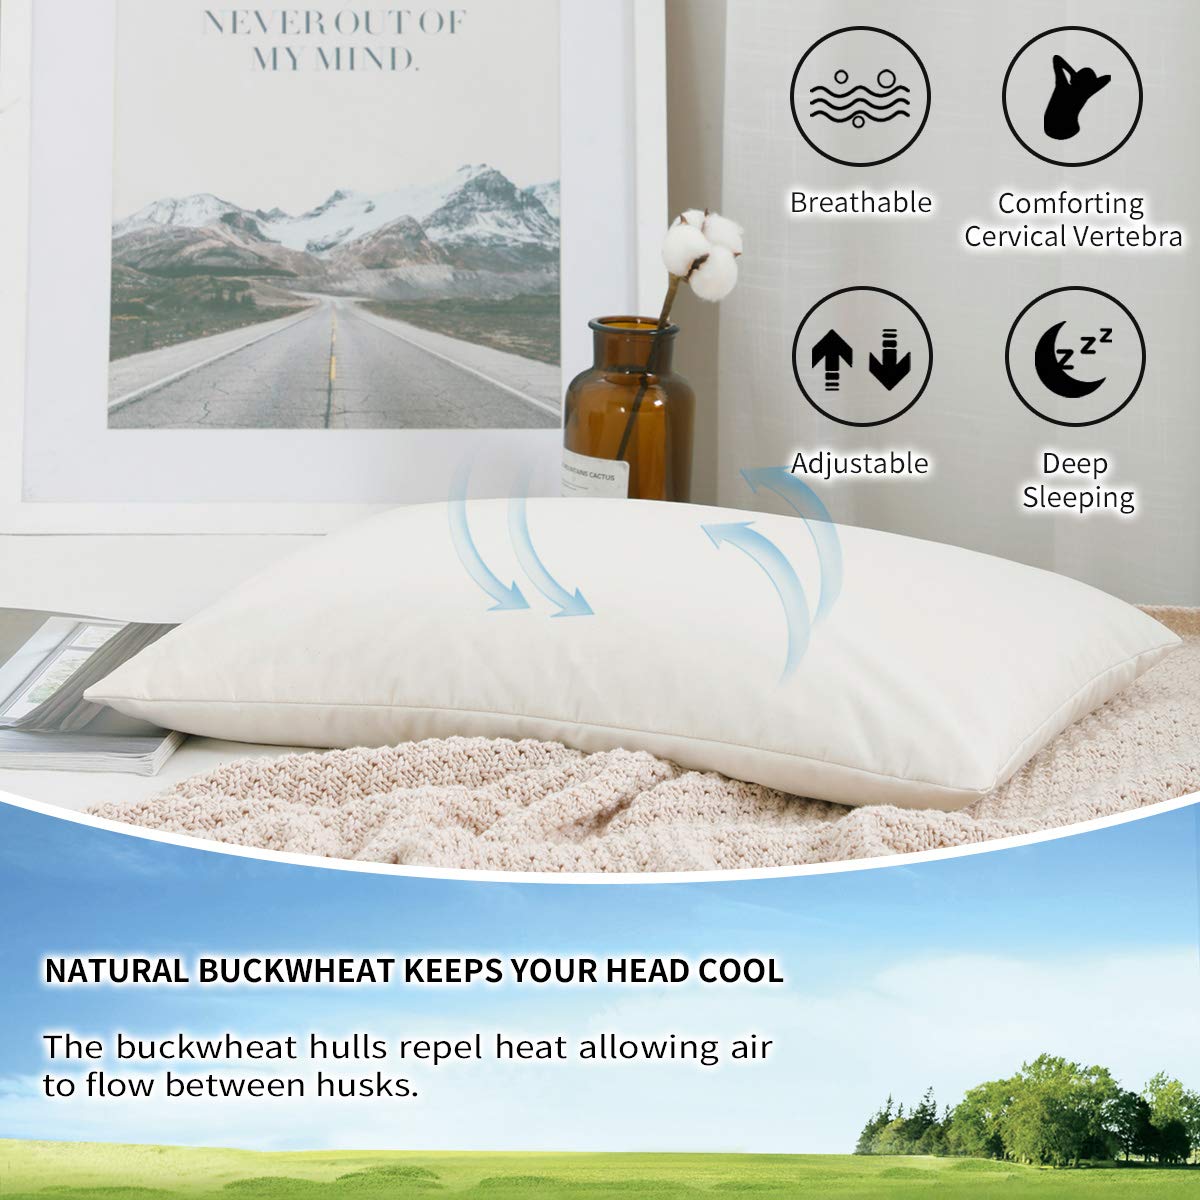 LOFE Organic Buckwheat Pillow for Sleeping - Small Travel Size14x20, Adjustable Loft, Breathable for Cool Sleep, Cervical Support for Back and Side Sleepers(Tartary Buckwheat Hulls)